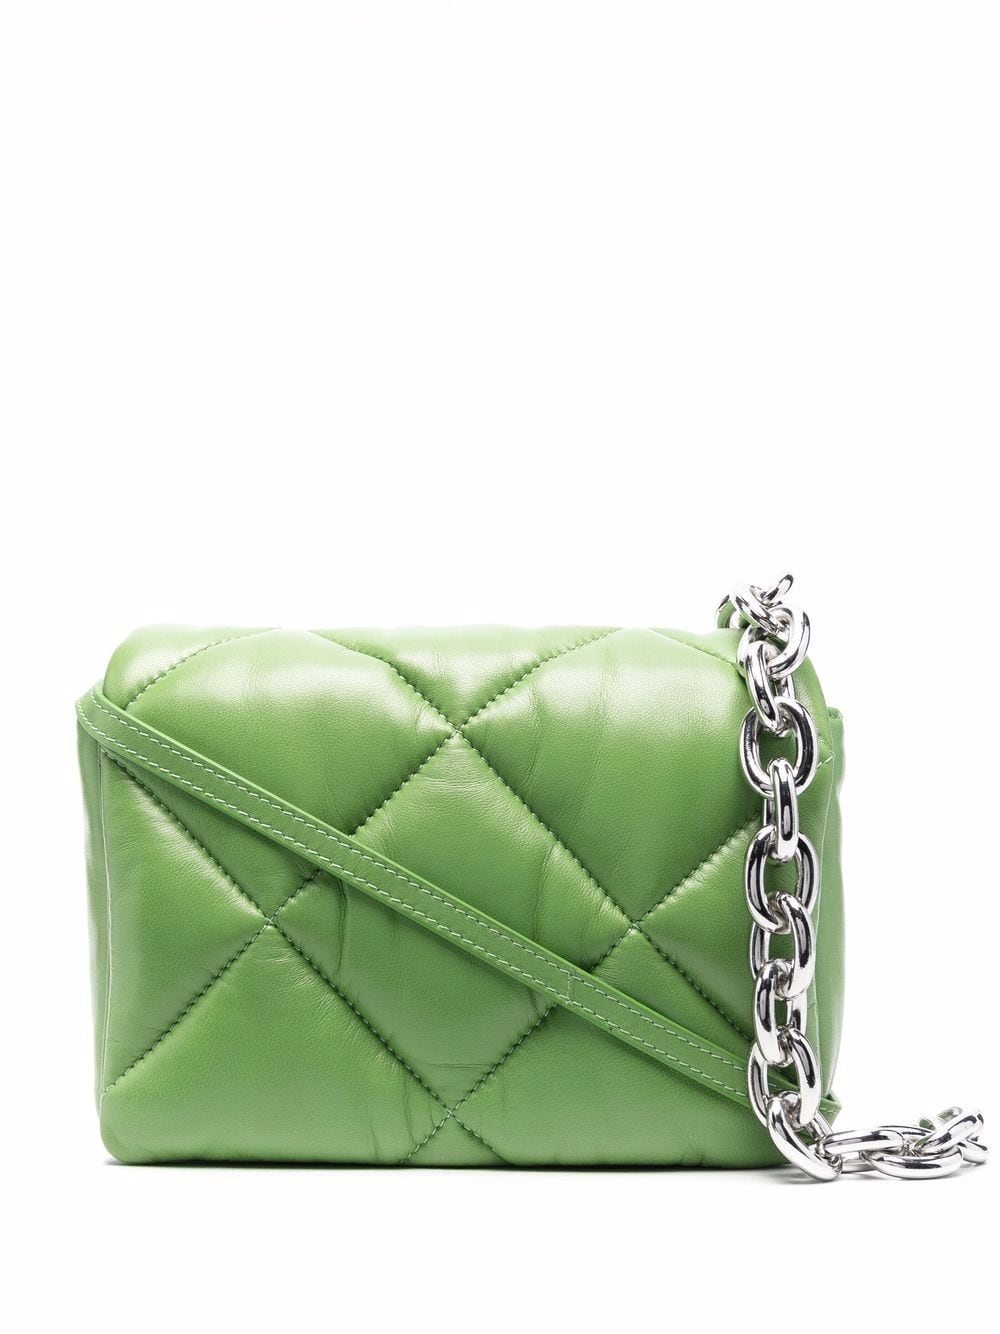 STAND STUDIO quilted flap tote bag - Green von STAND STUDIO